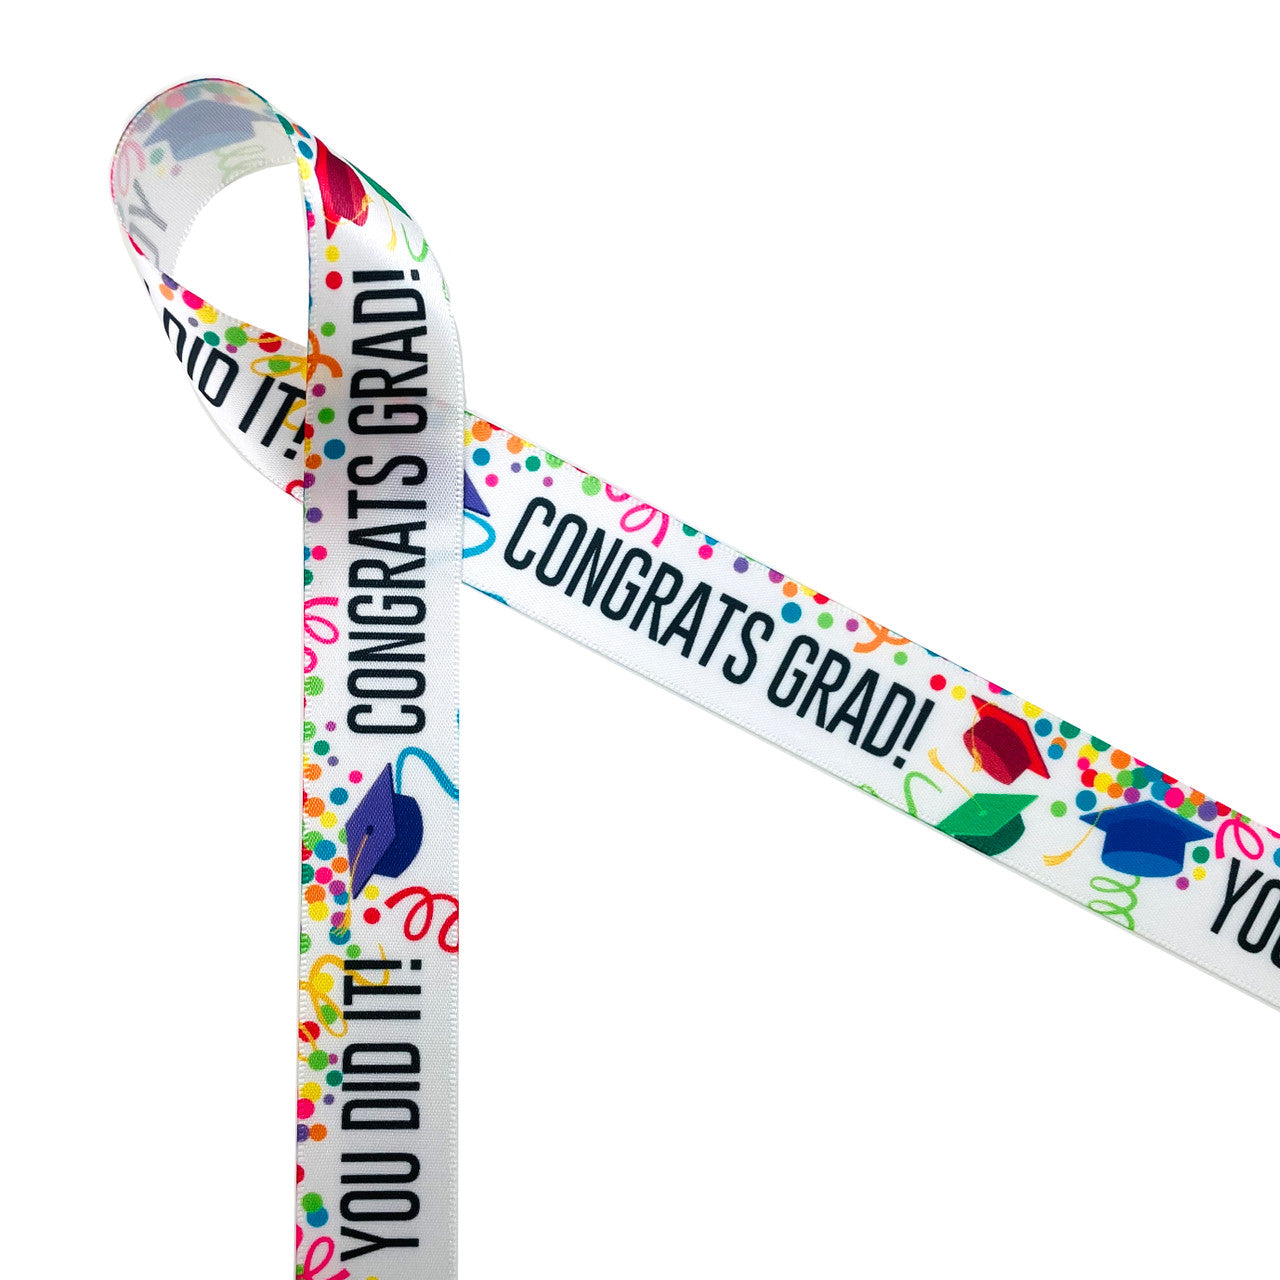 Graduation is a celebration of achievement! Congrats Grad with tossed hats of red, blue, green, black and purple with colorful confetti printed on 7/8" white single face satin is the perfect ribbon for gift wrap, party decor, party favors, and sweets tables. This is a great ribbon for Graduation themed crafts, sewing and quilting projects too! All our ribbon is designed and printed in the USA